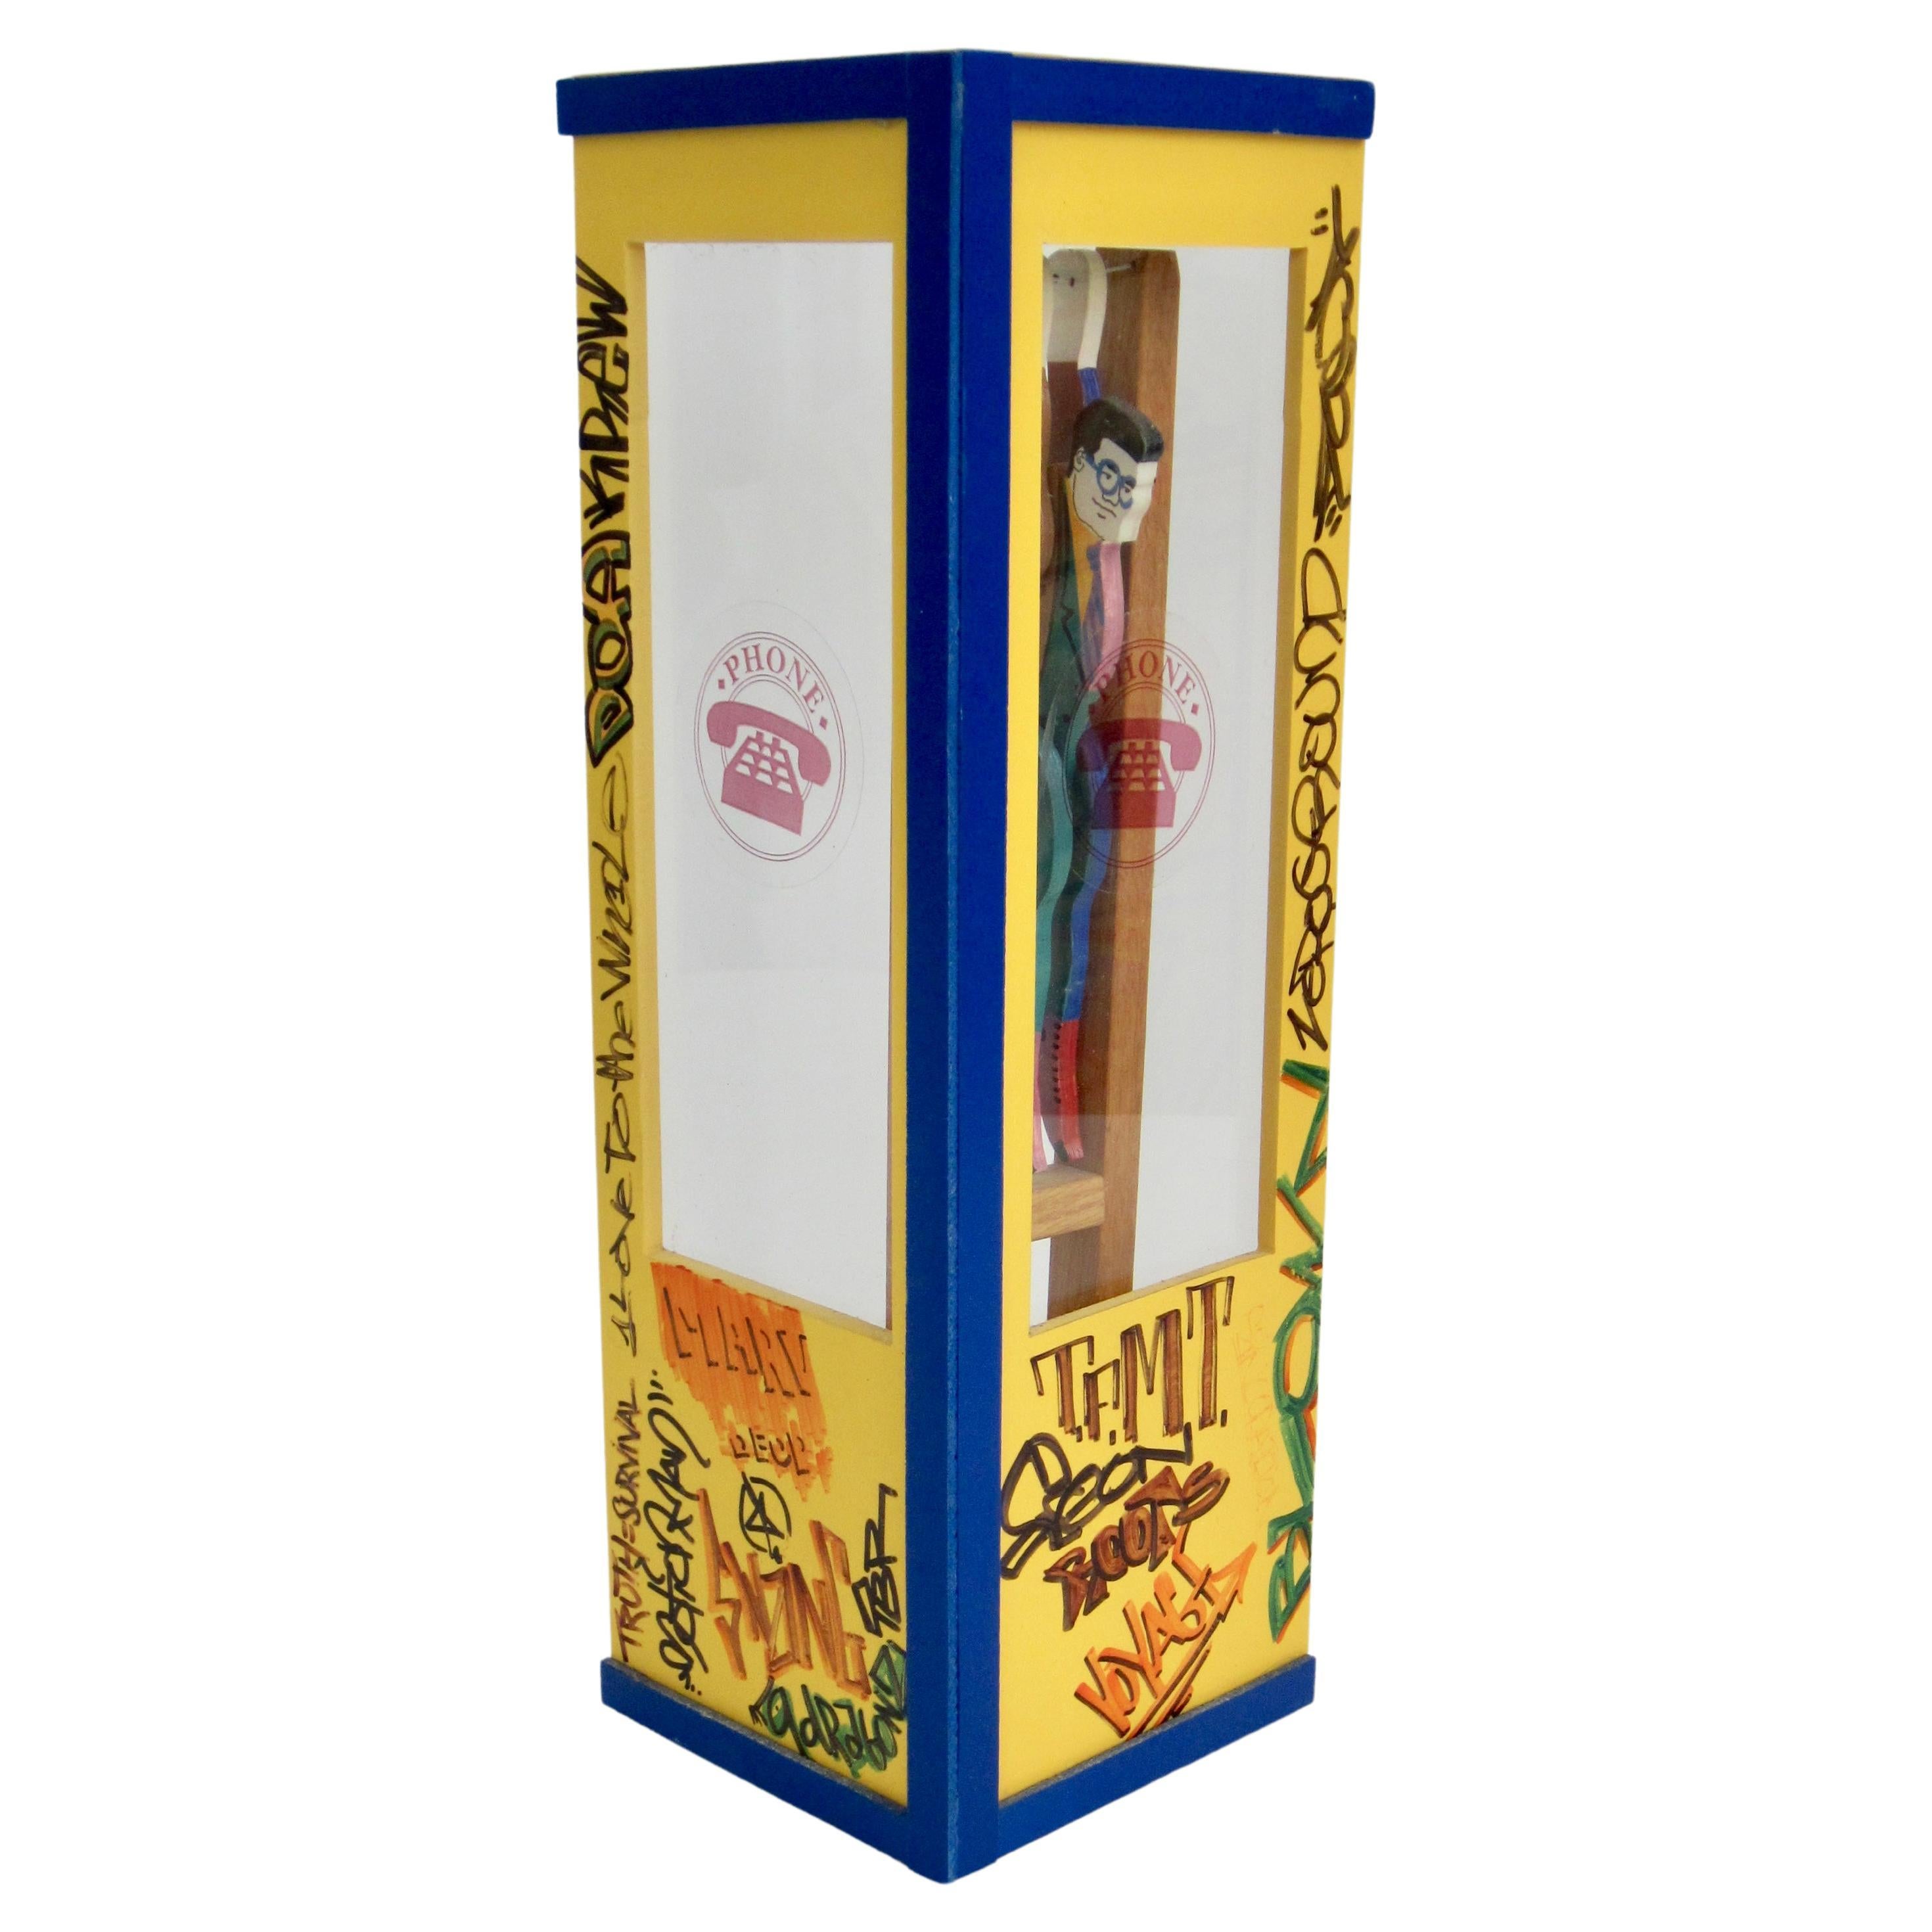 Superman/Clark Kent Wooden Trapeze Artist Toy with Graffiti Phone Booth For Sale